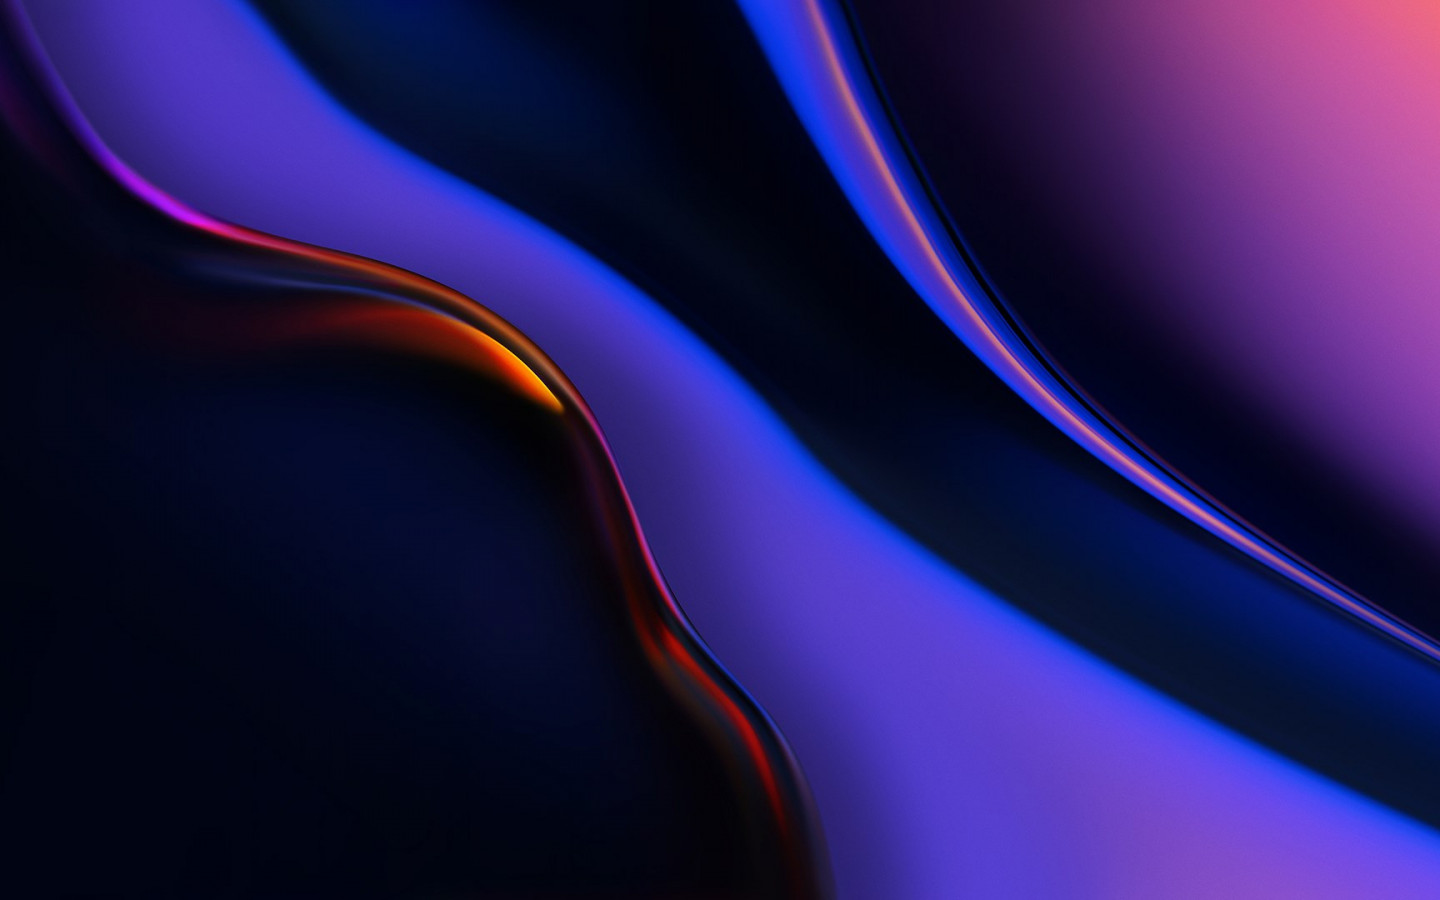 Download wallpaper: OnePlus 6T stock abstract 1440x900